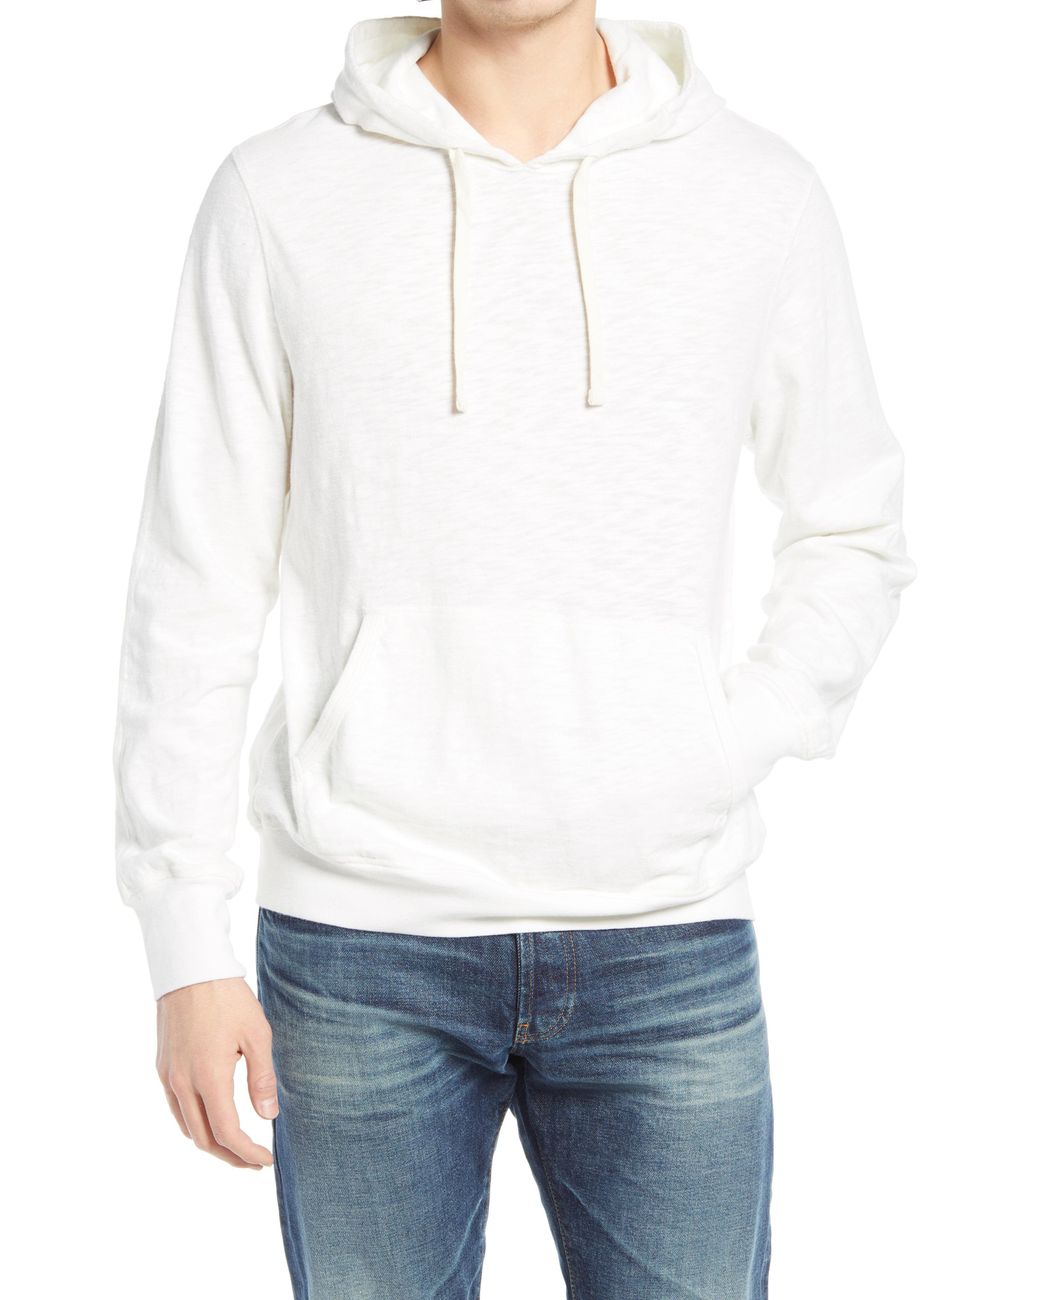 Rails Mammoth Cotton Hoodie in White for Men - Lyst